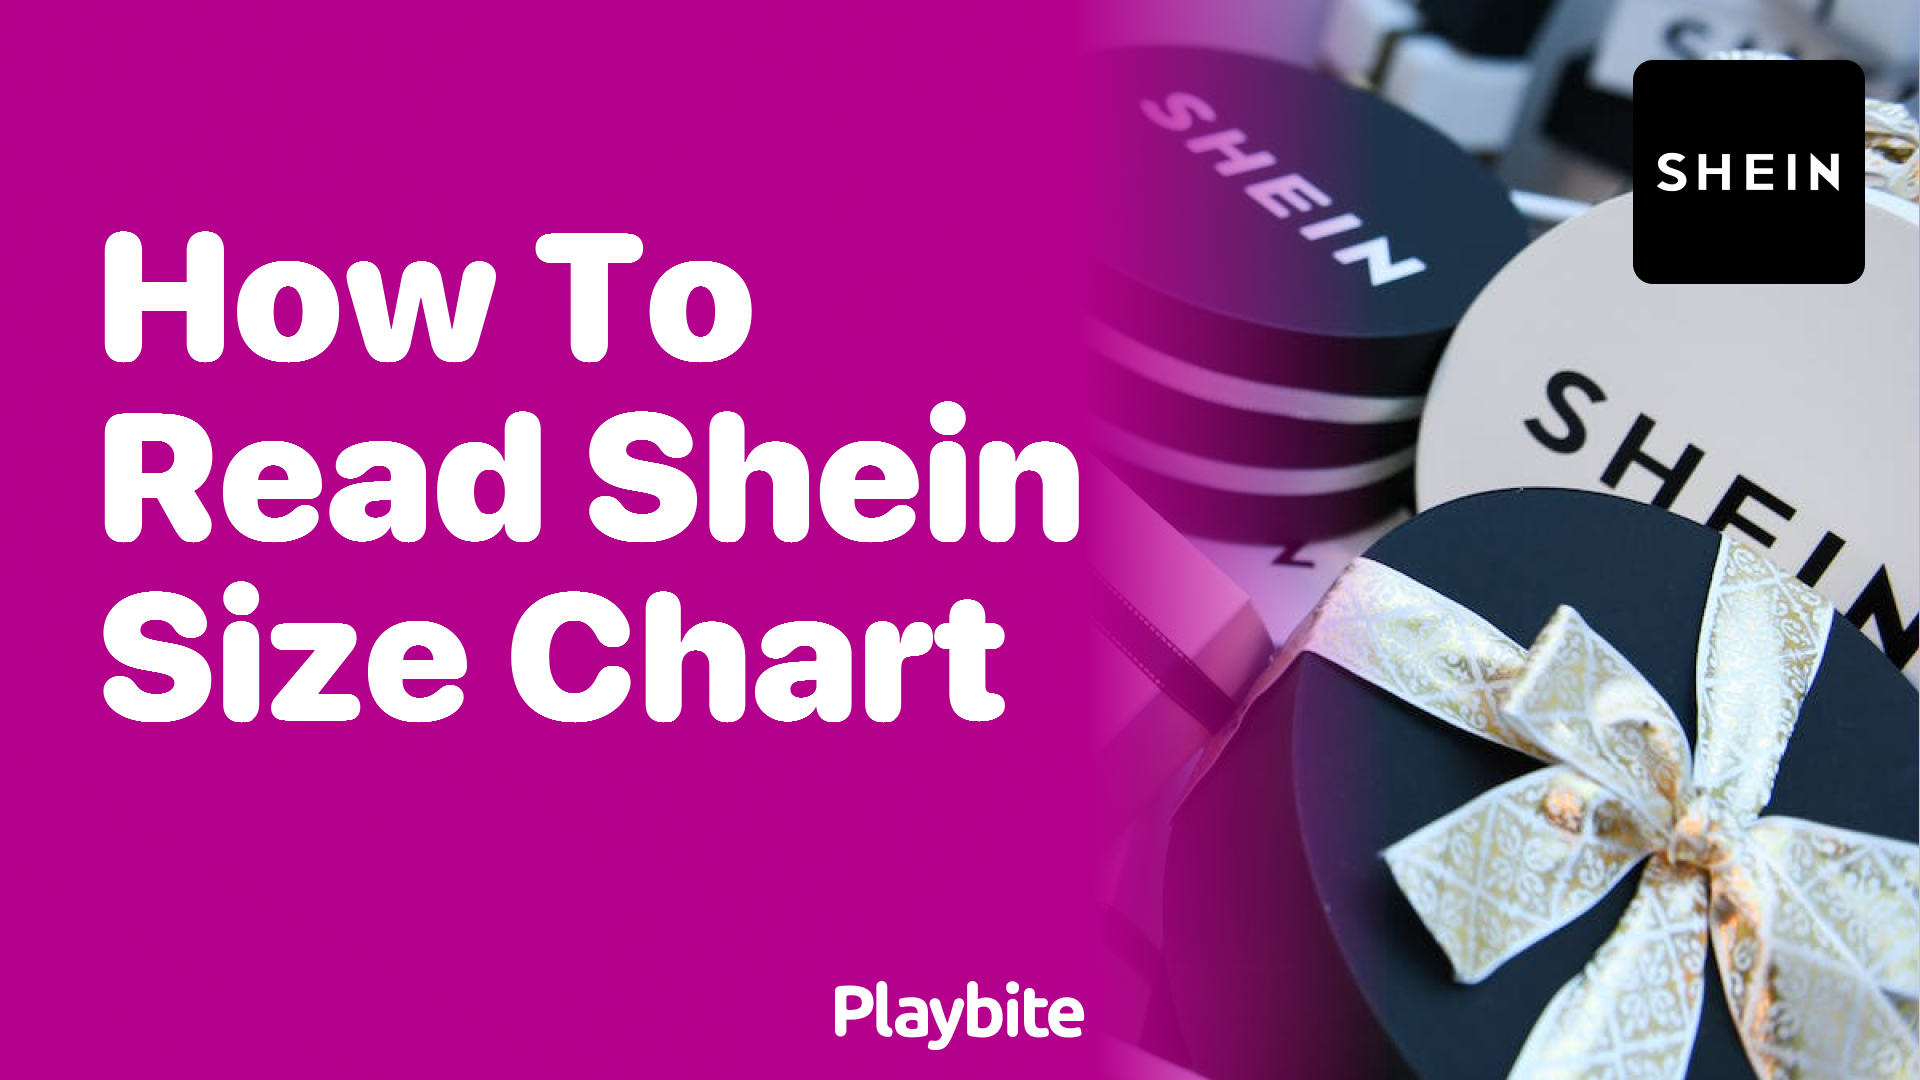 How to Read the SHEIN Size Chart: A Simple Guide - Playbite